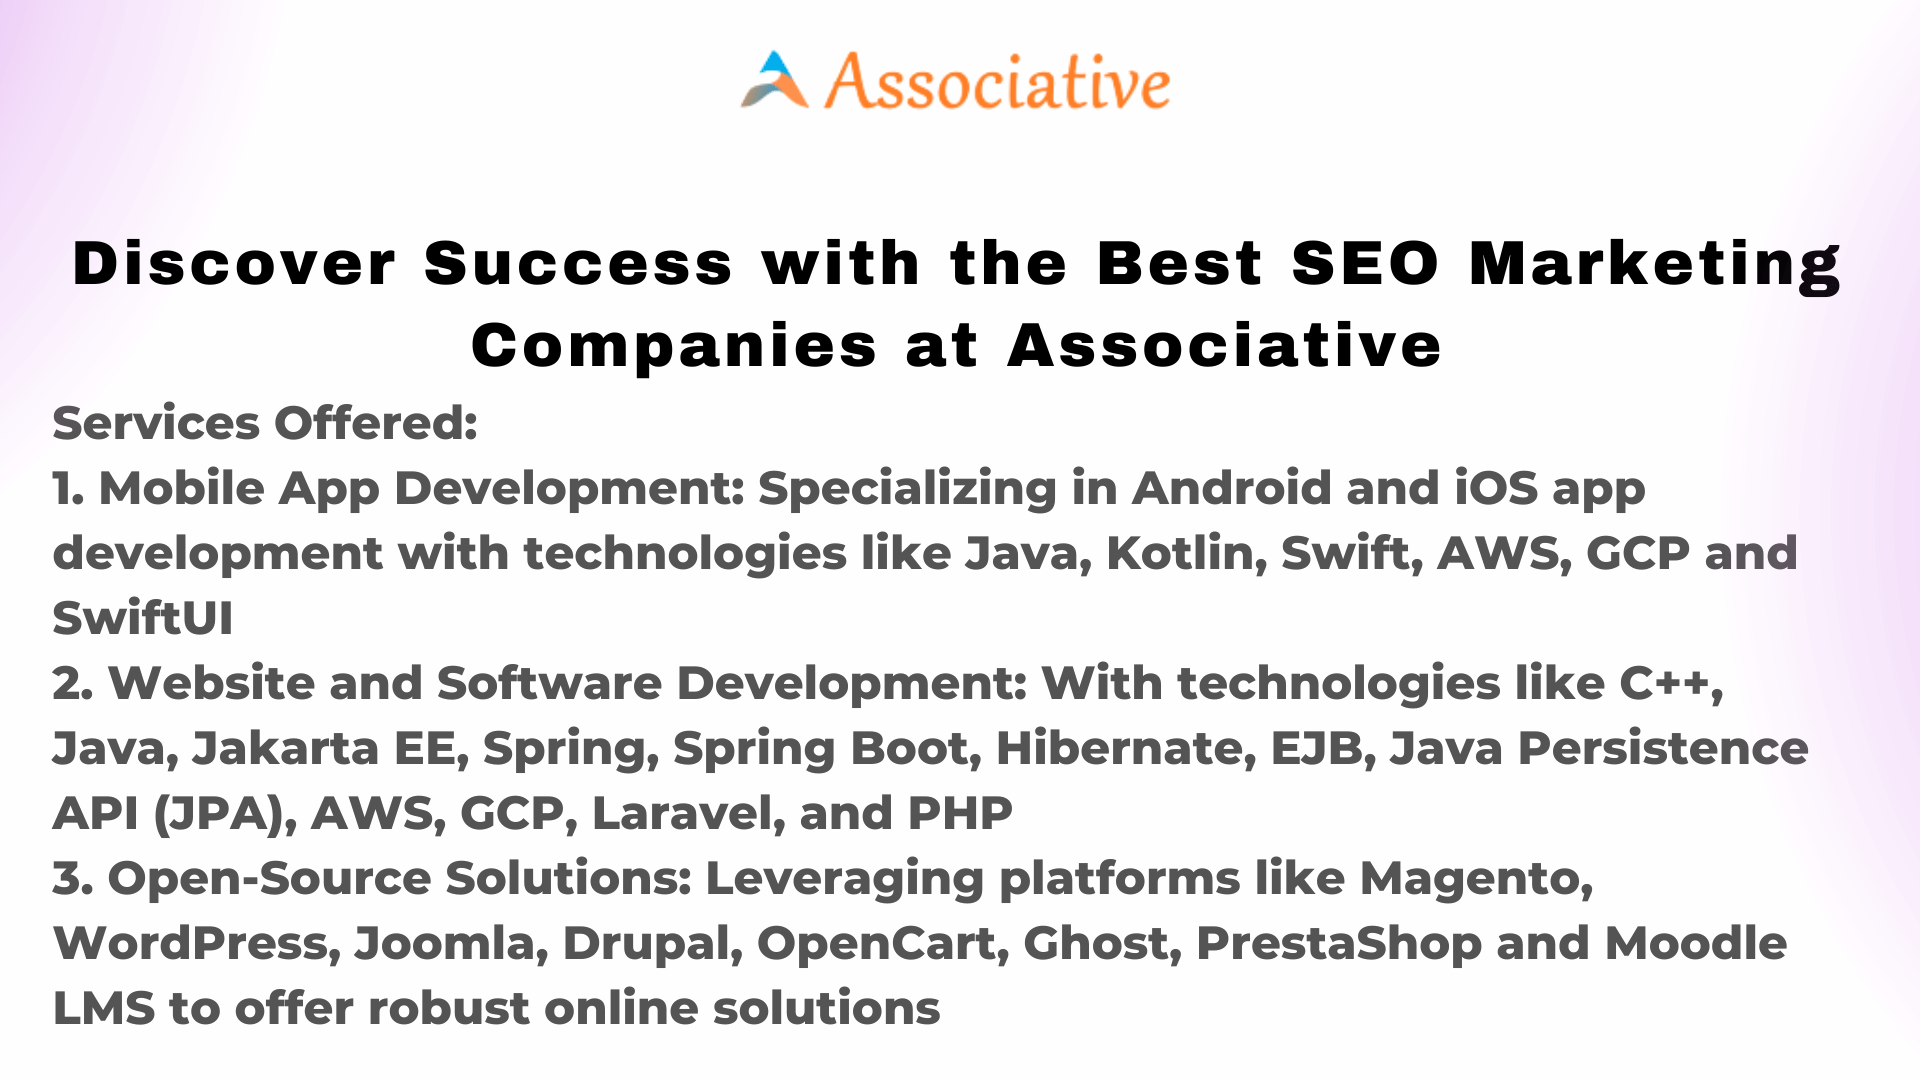 Discover Success with the Best SEO Marketing Companies at Associative